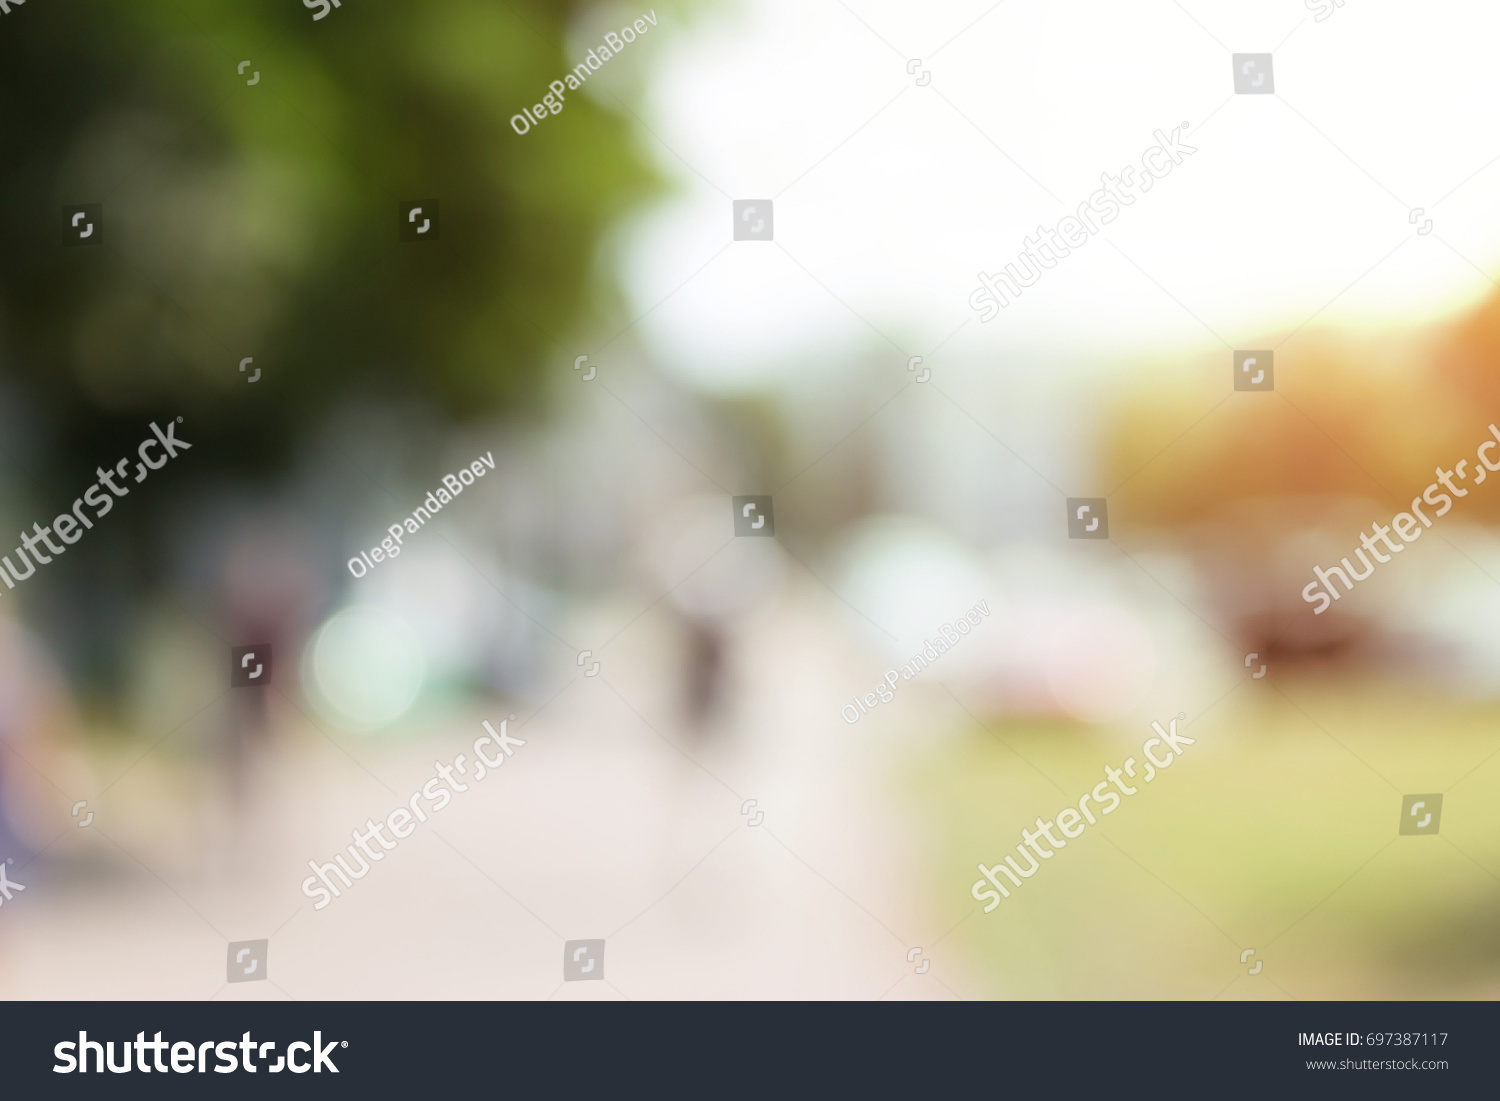 Abstract blurred background of a day city #697387117